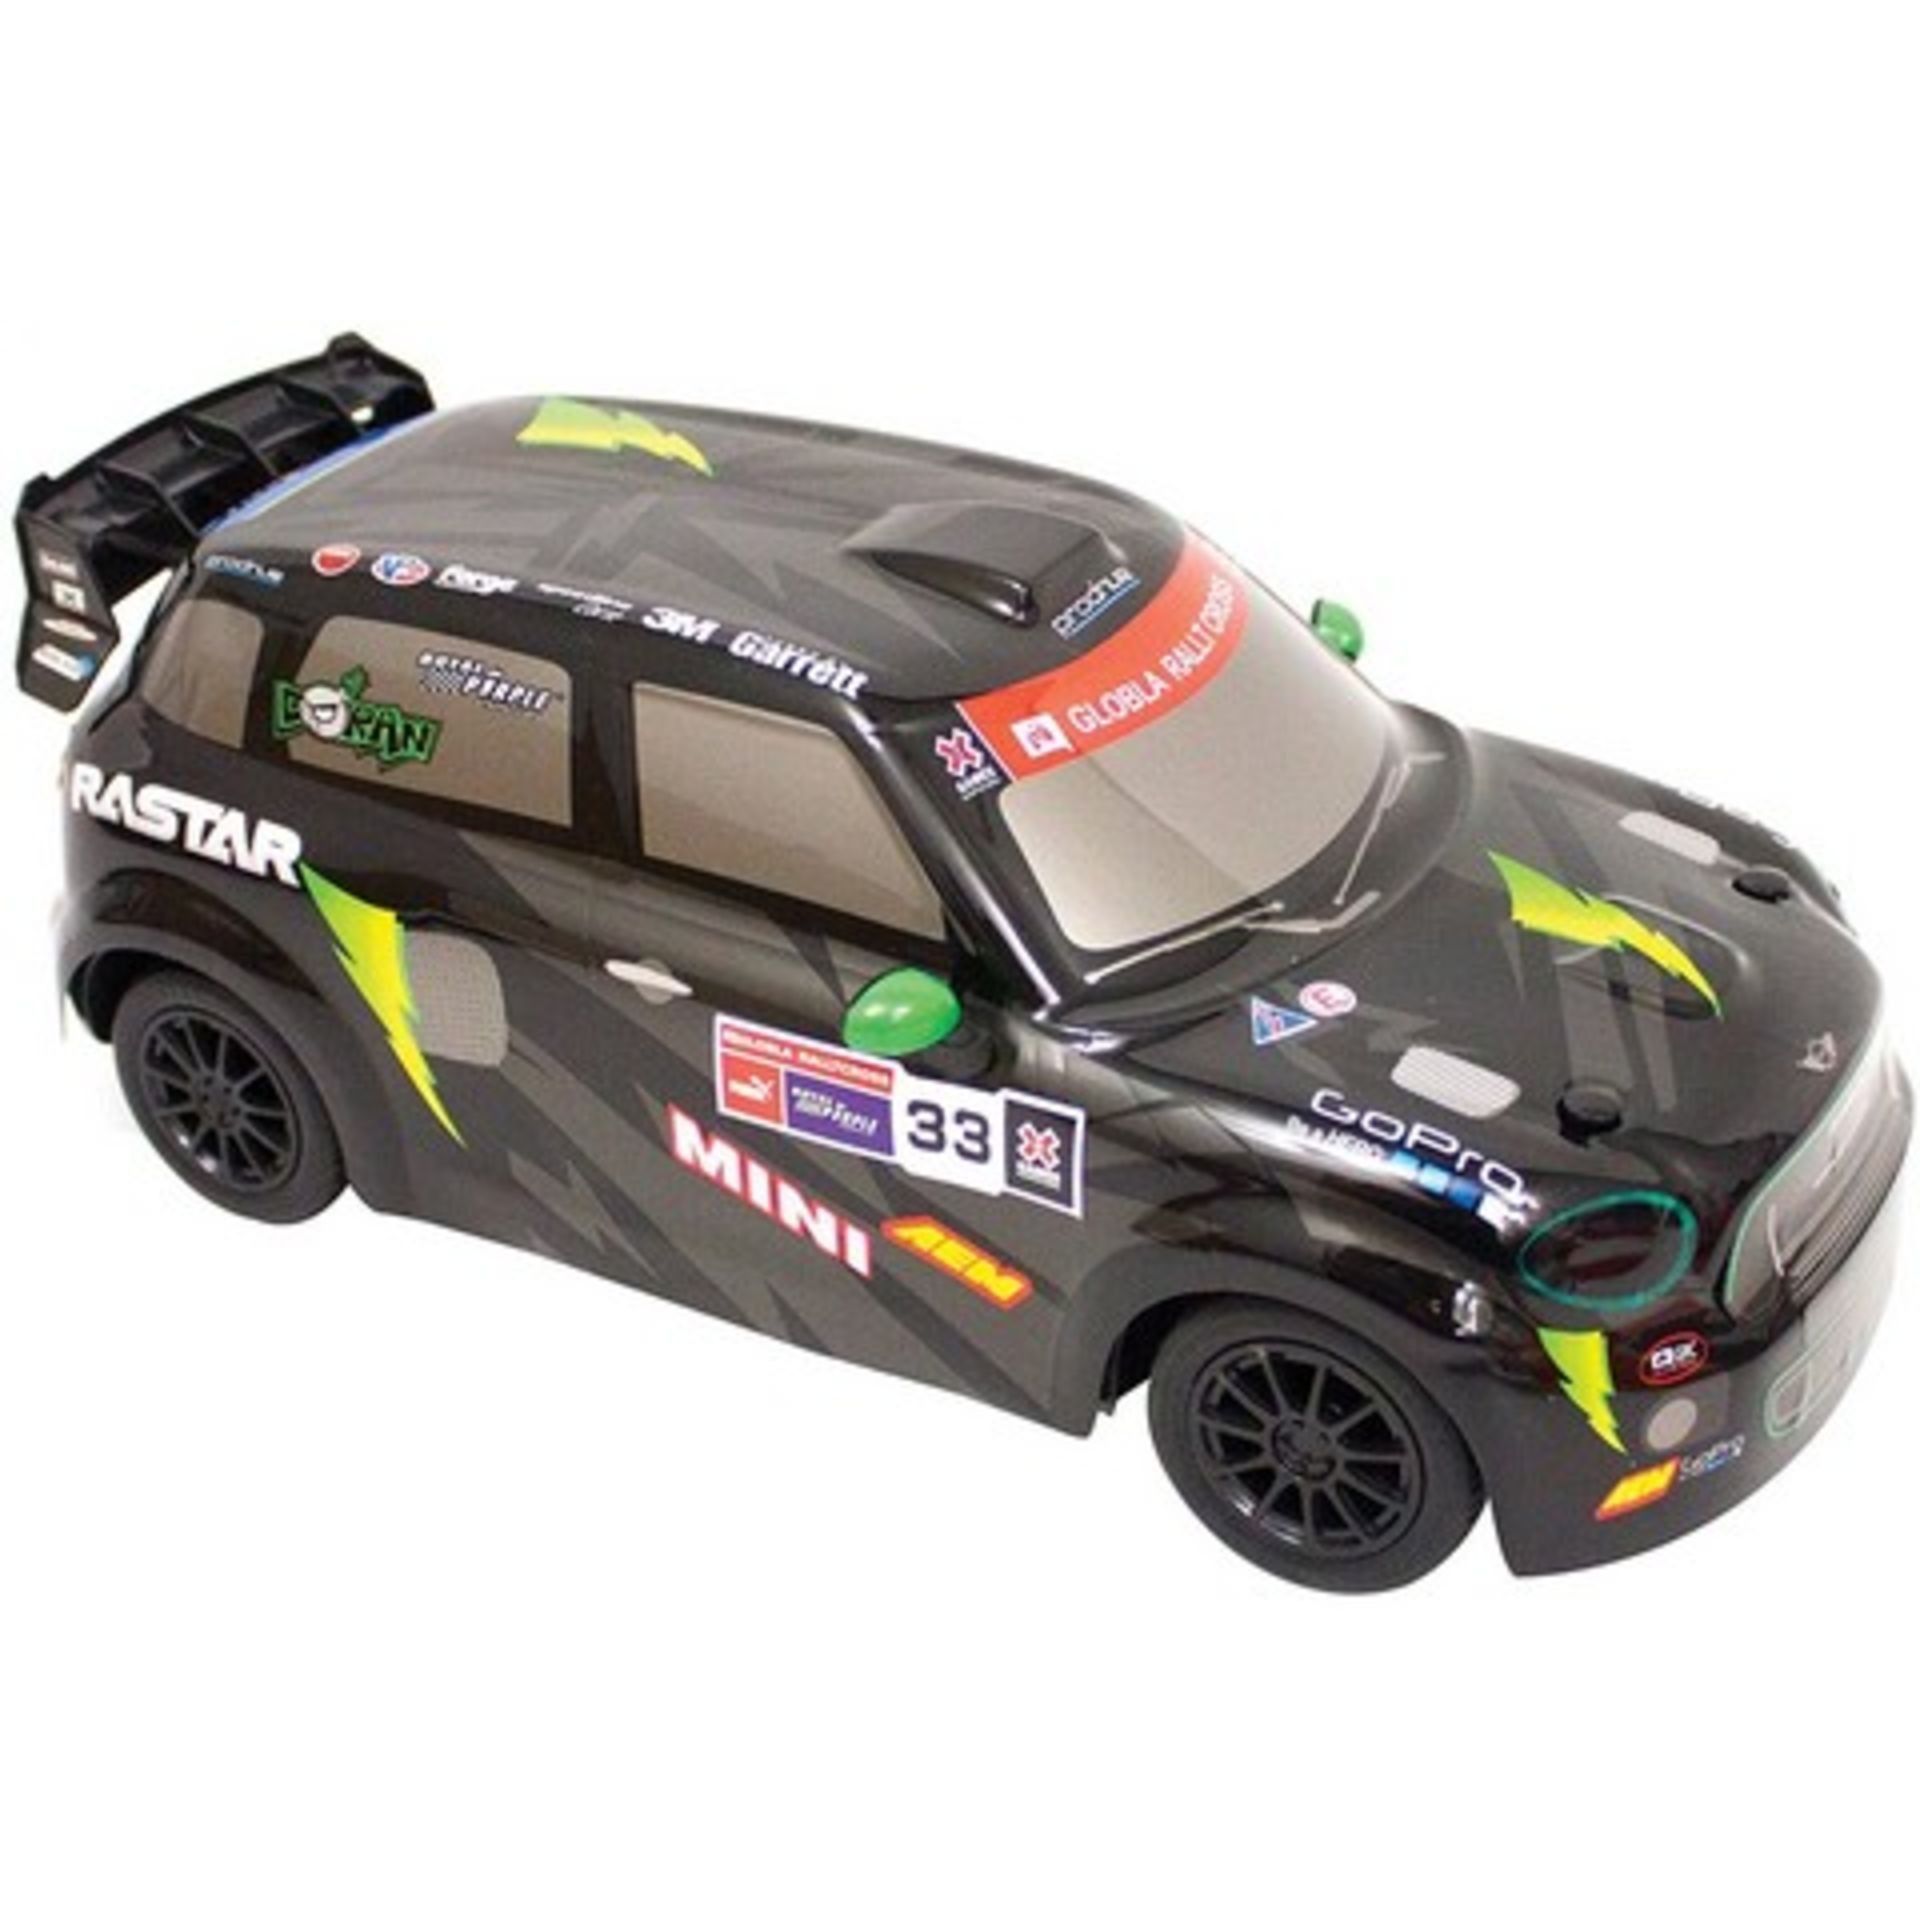 + VAT Brand New R/C 1:14 Scale Mini Countryman JCW RX - Amazon Price £49.95 - Colours May Vary